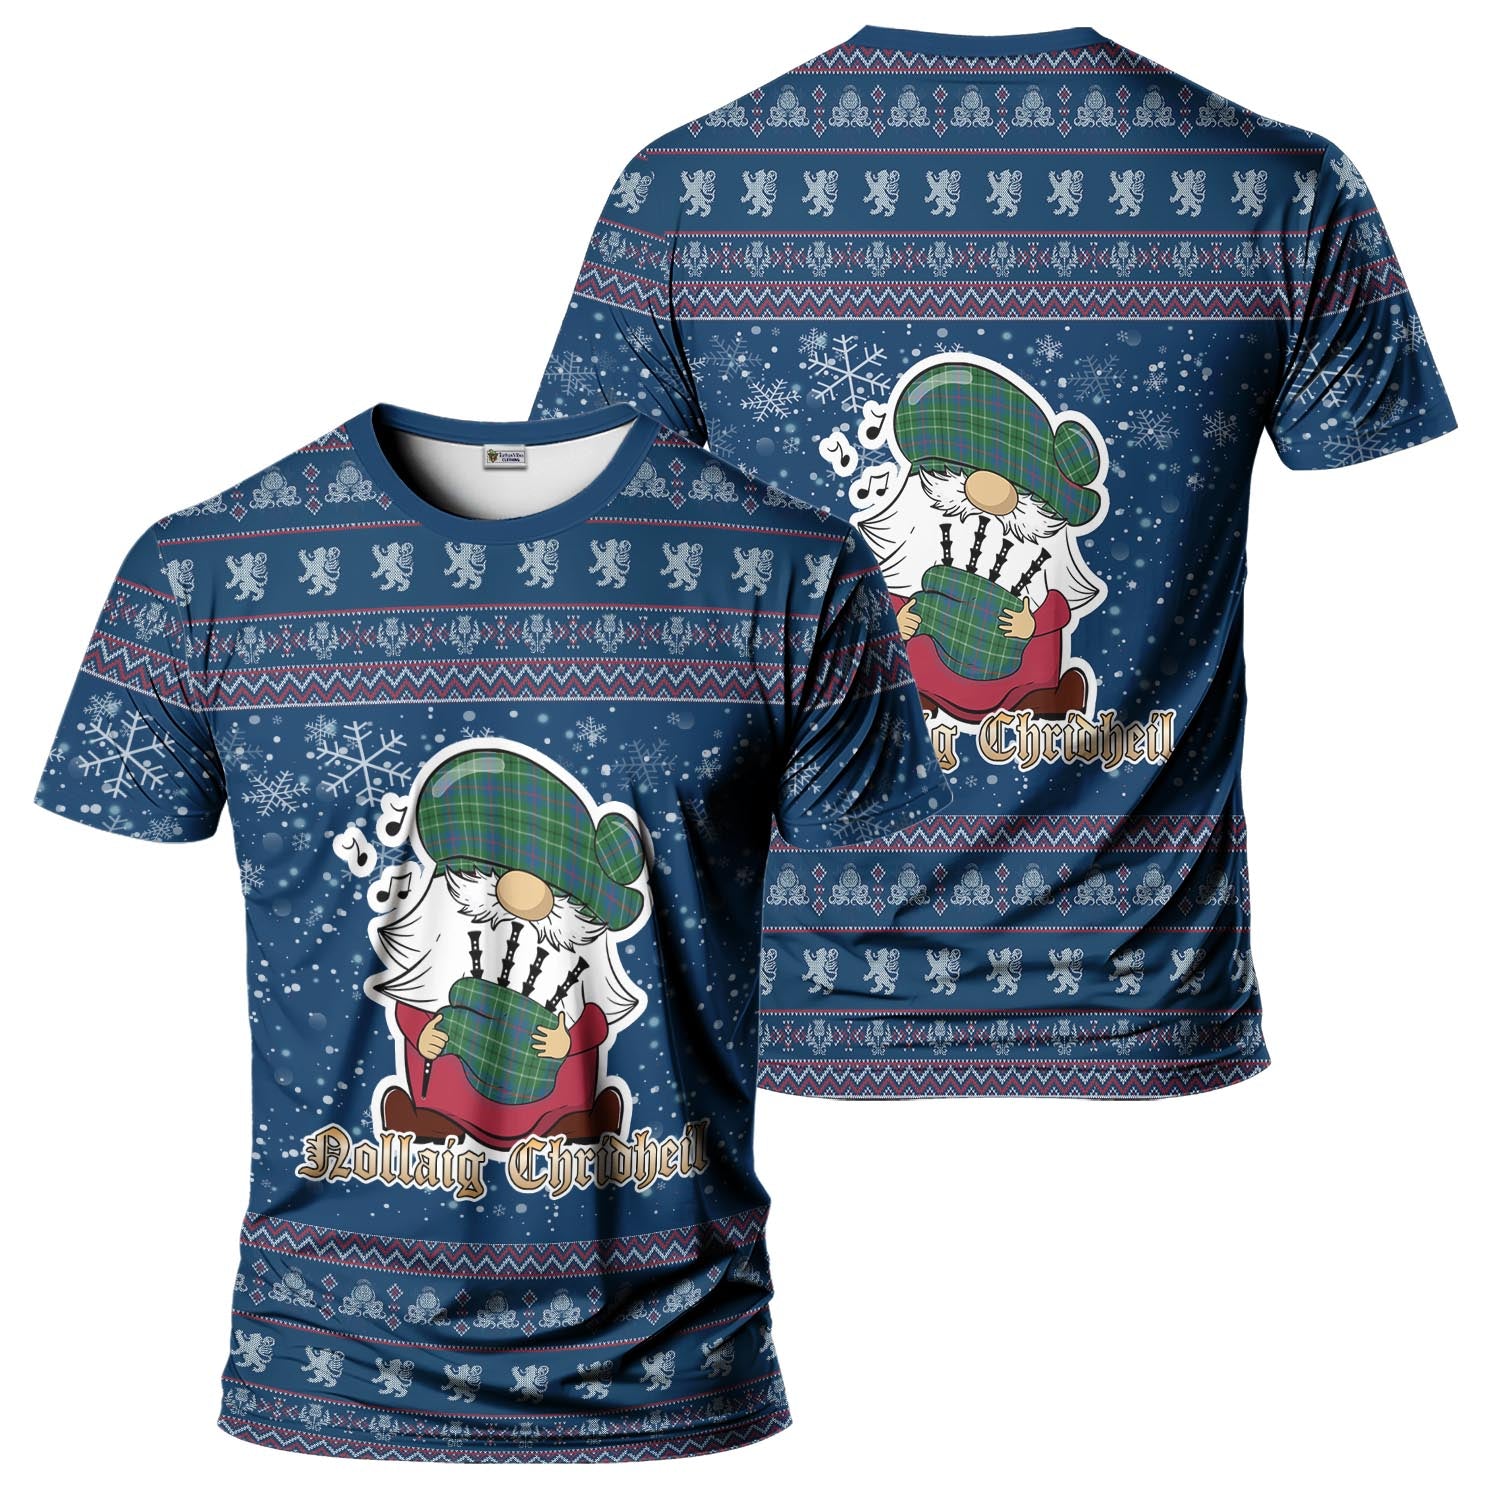 Duncan Ancient Clan Christmas Family T-Shirt with Funny Gnome Playing Bagpipes Kid's Shirt Blue - Tartanvibesclothing